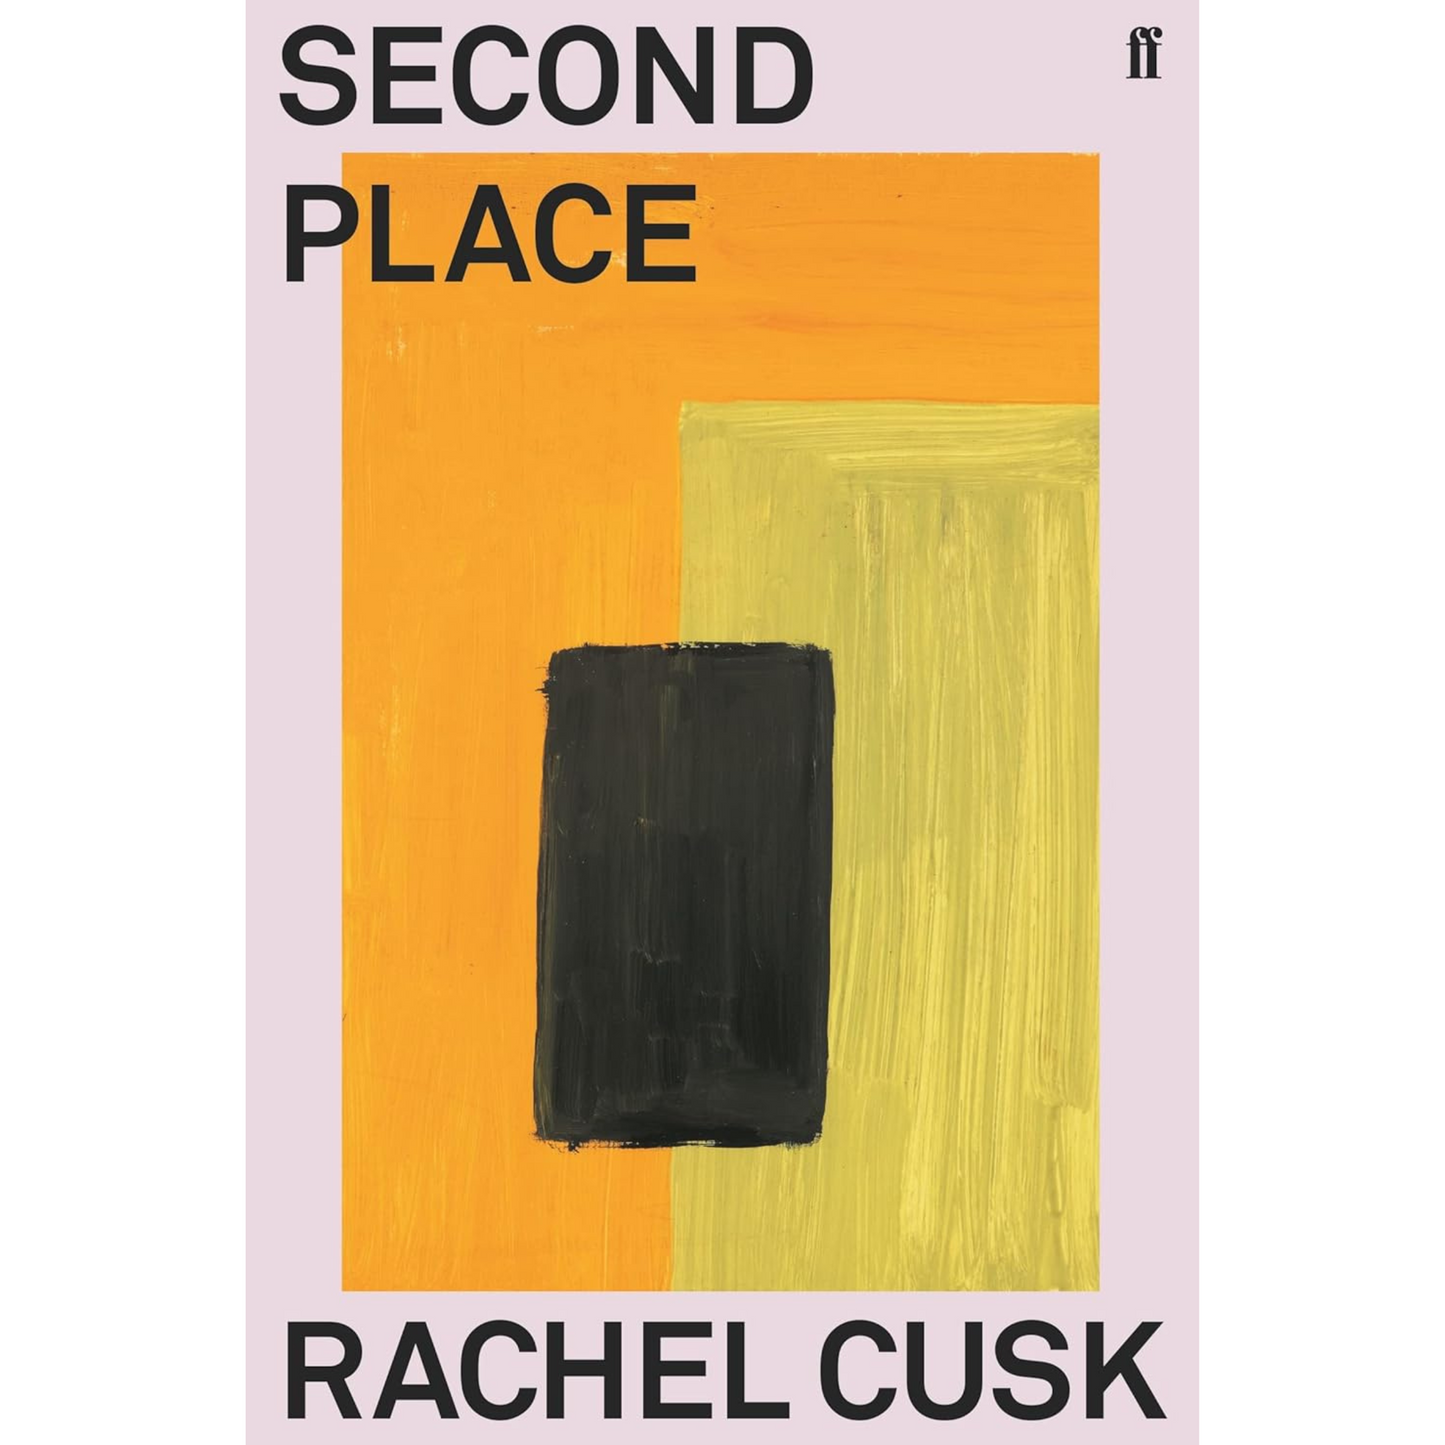 Second place by Rachel Cusk book front cover